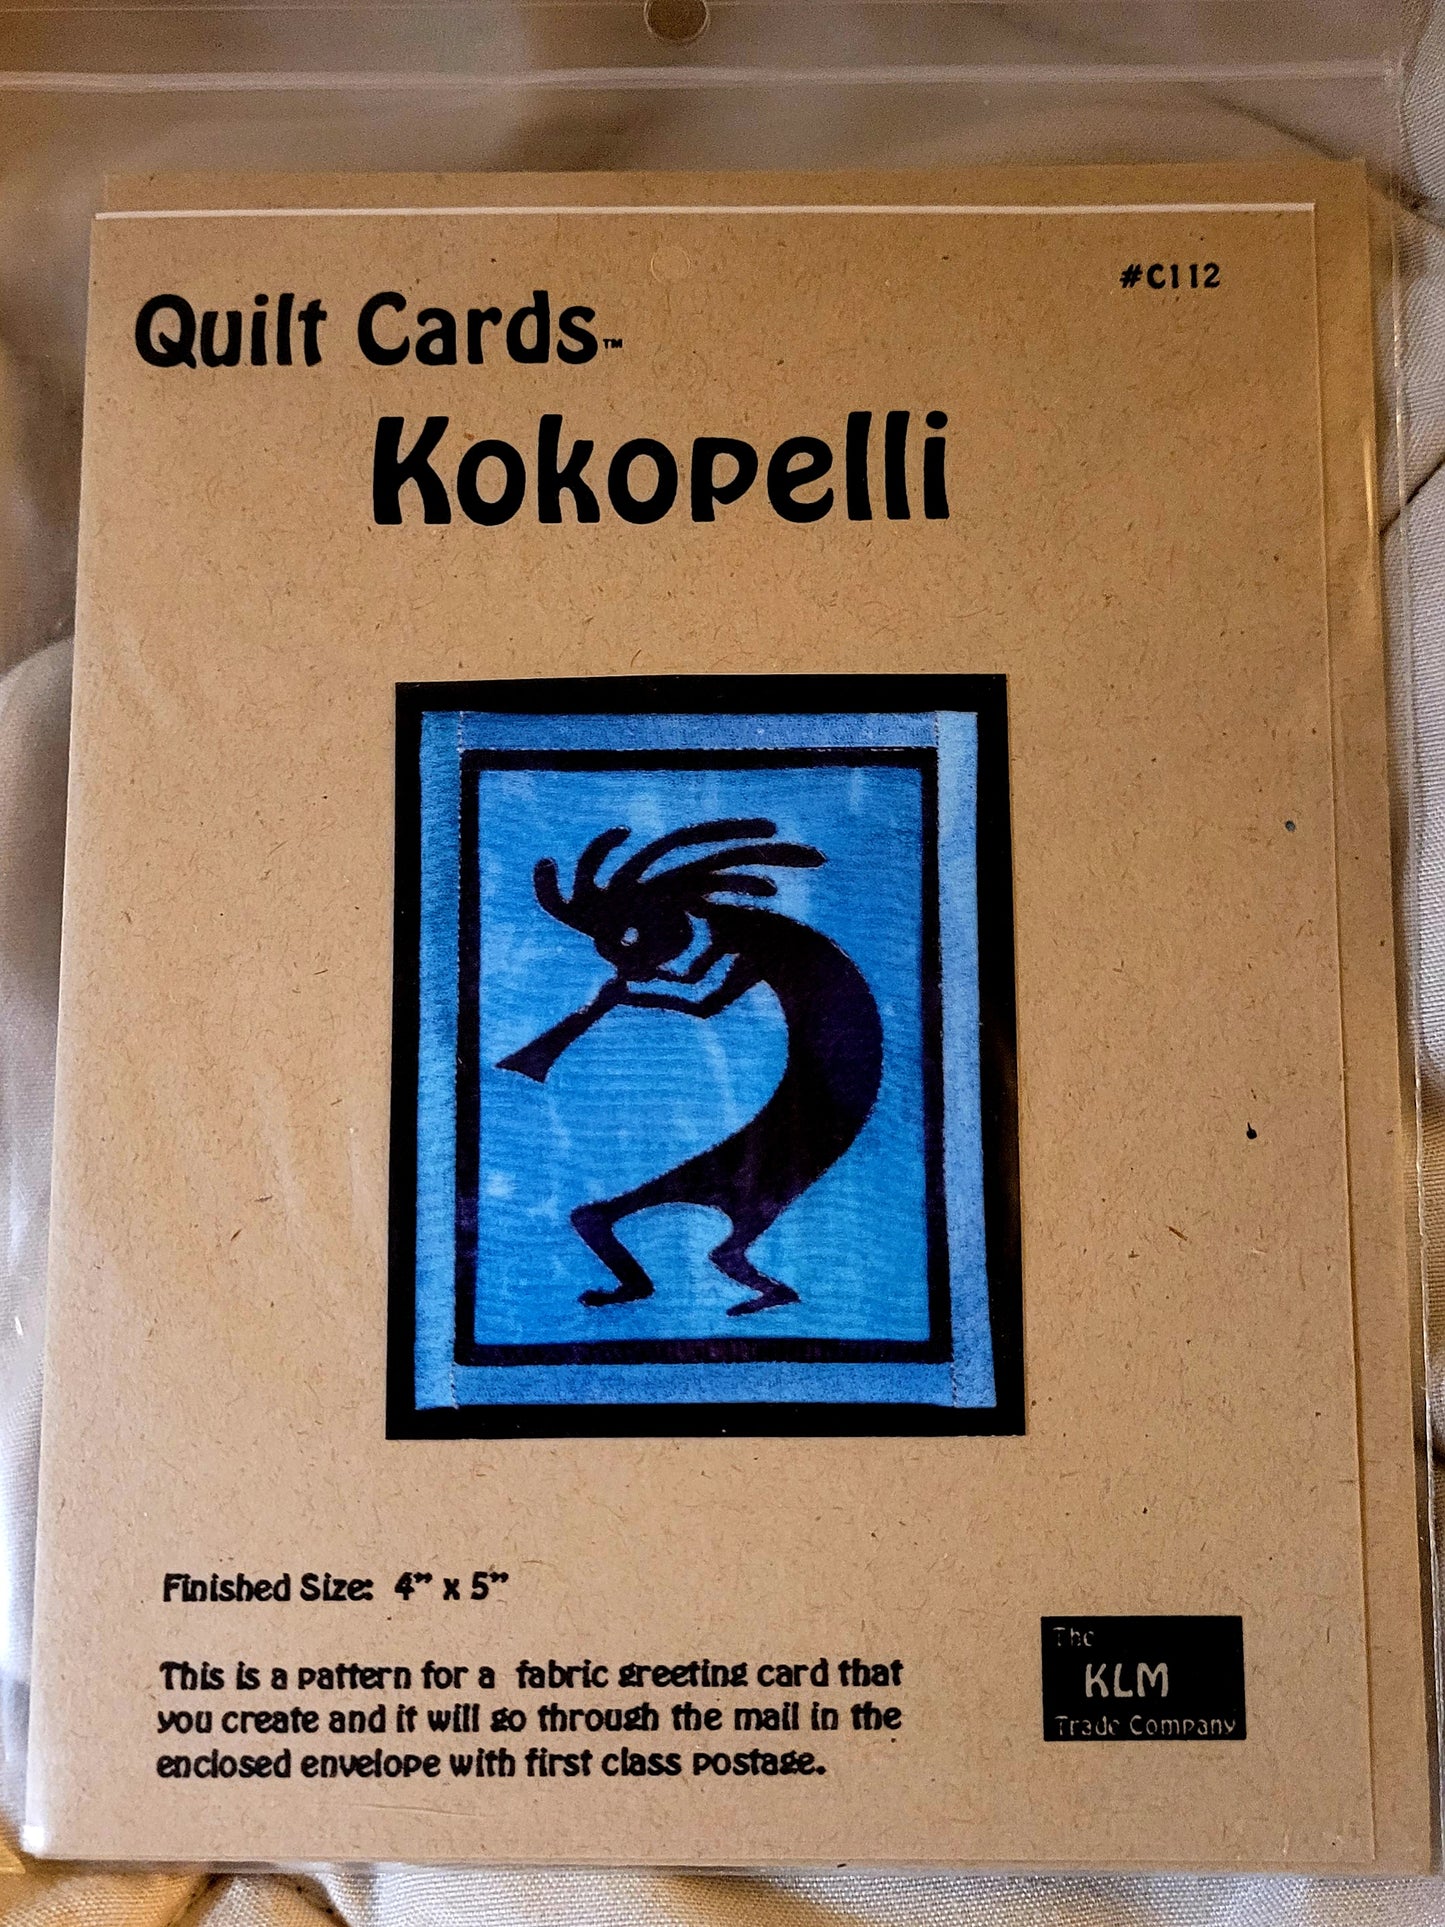 "Kokopelli" #C112 Quilt Cards by KLM Trading Co. *BRAND NEW